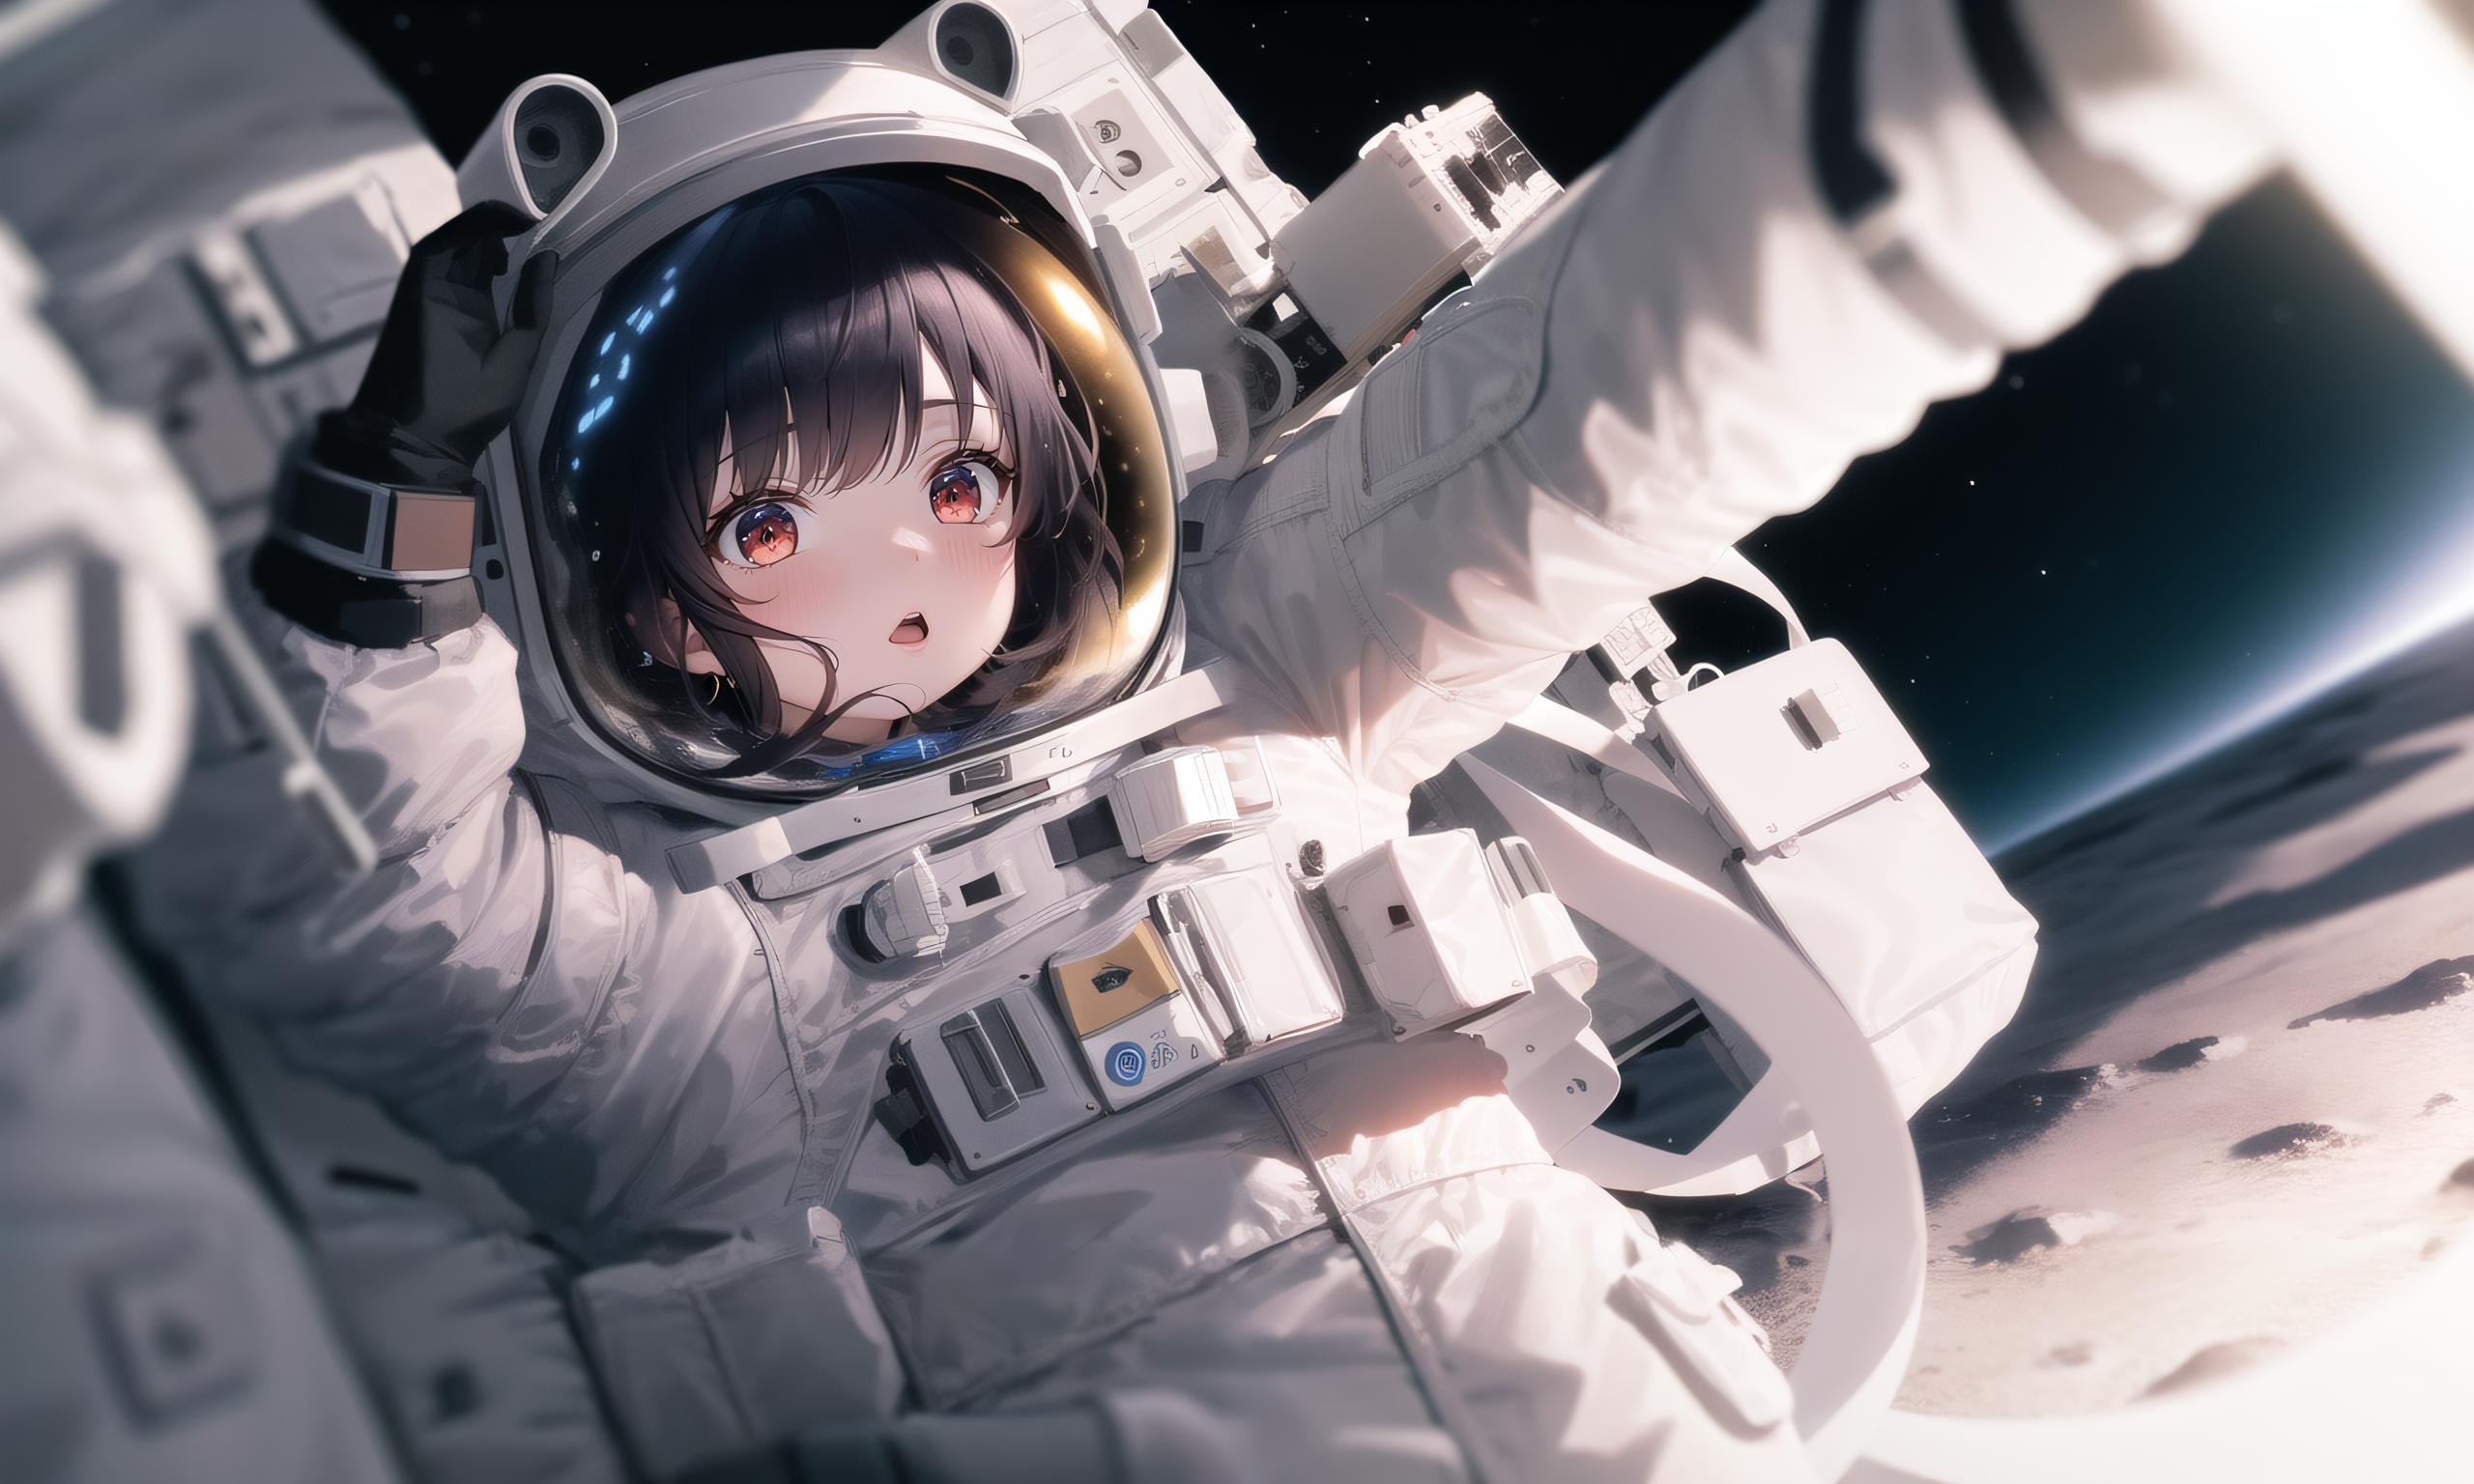 Clothes Spacesuit image by LeonTheLord